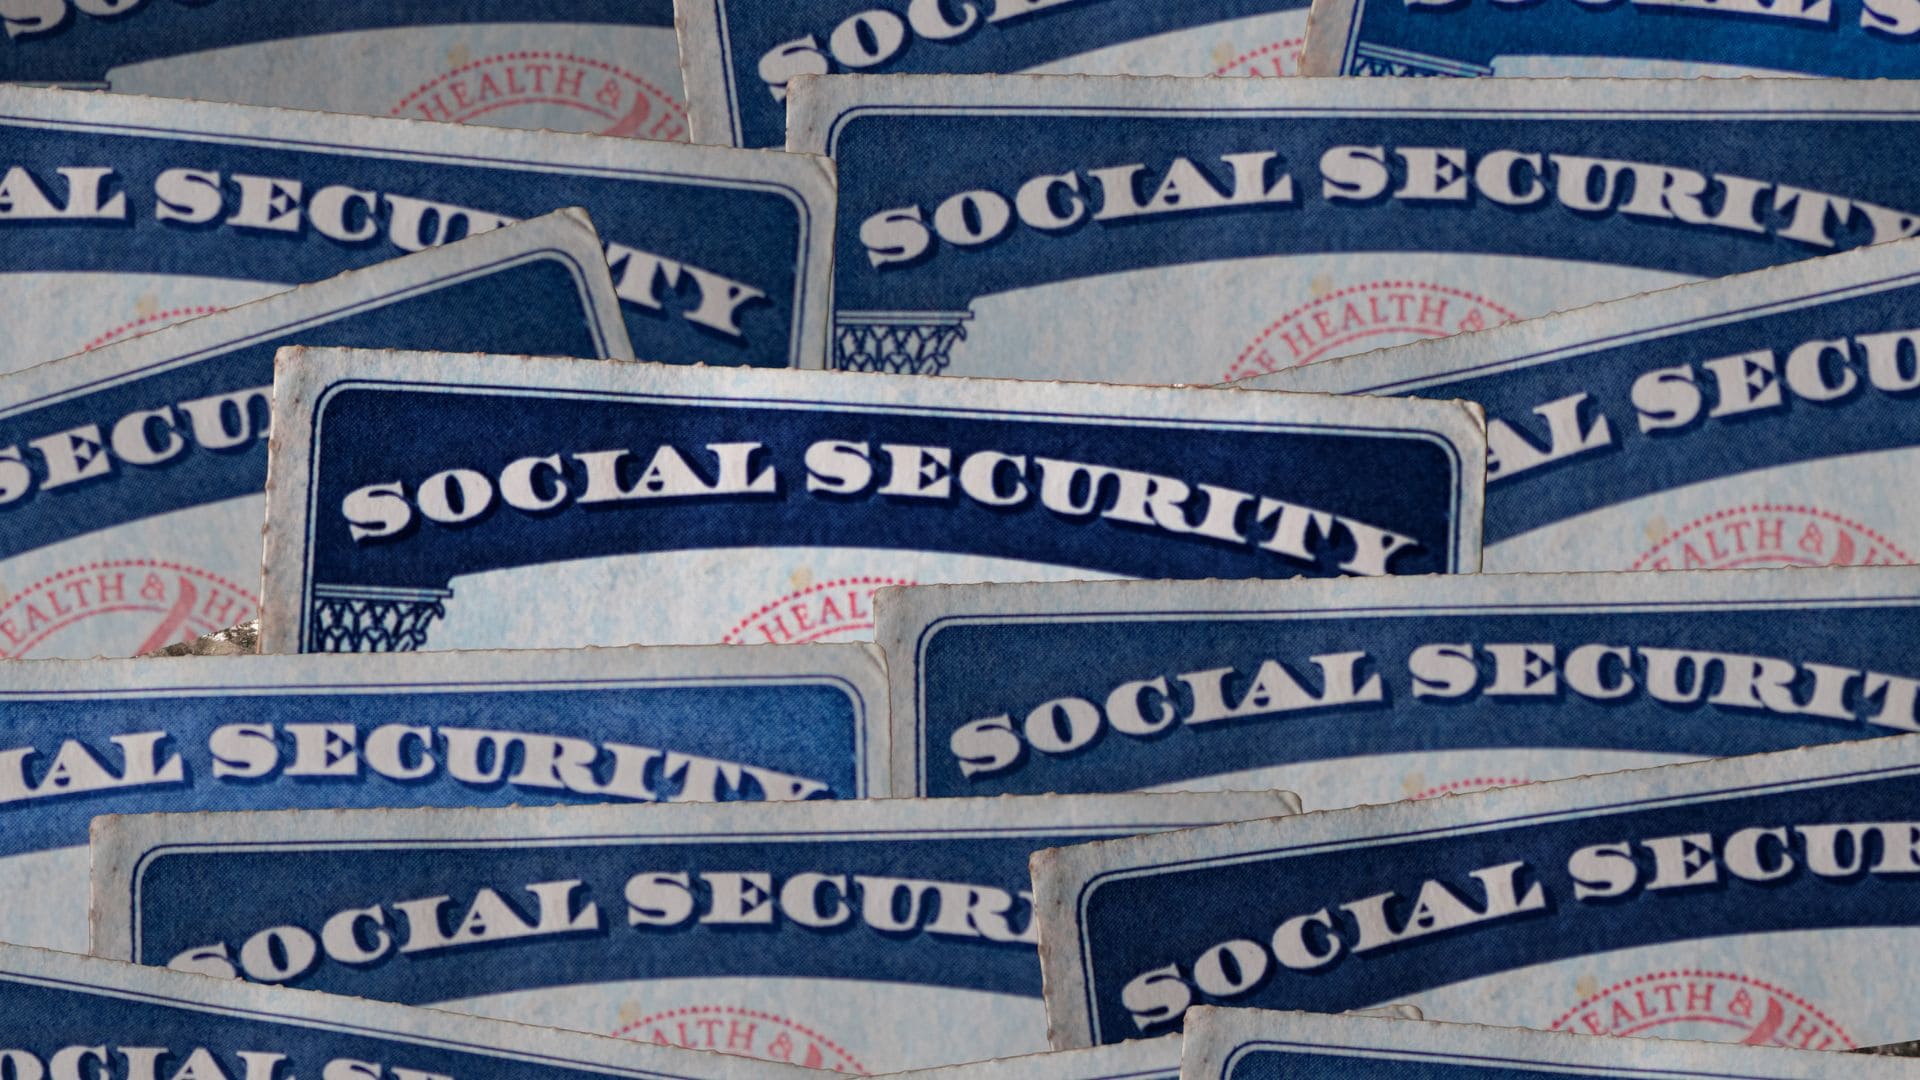 If you do not activate the fastest collection method your Social Security payment could arrive today